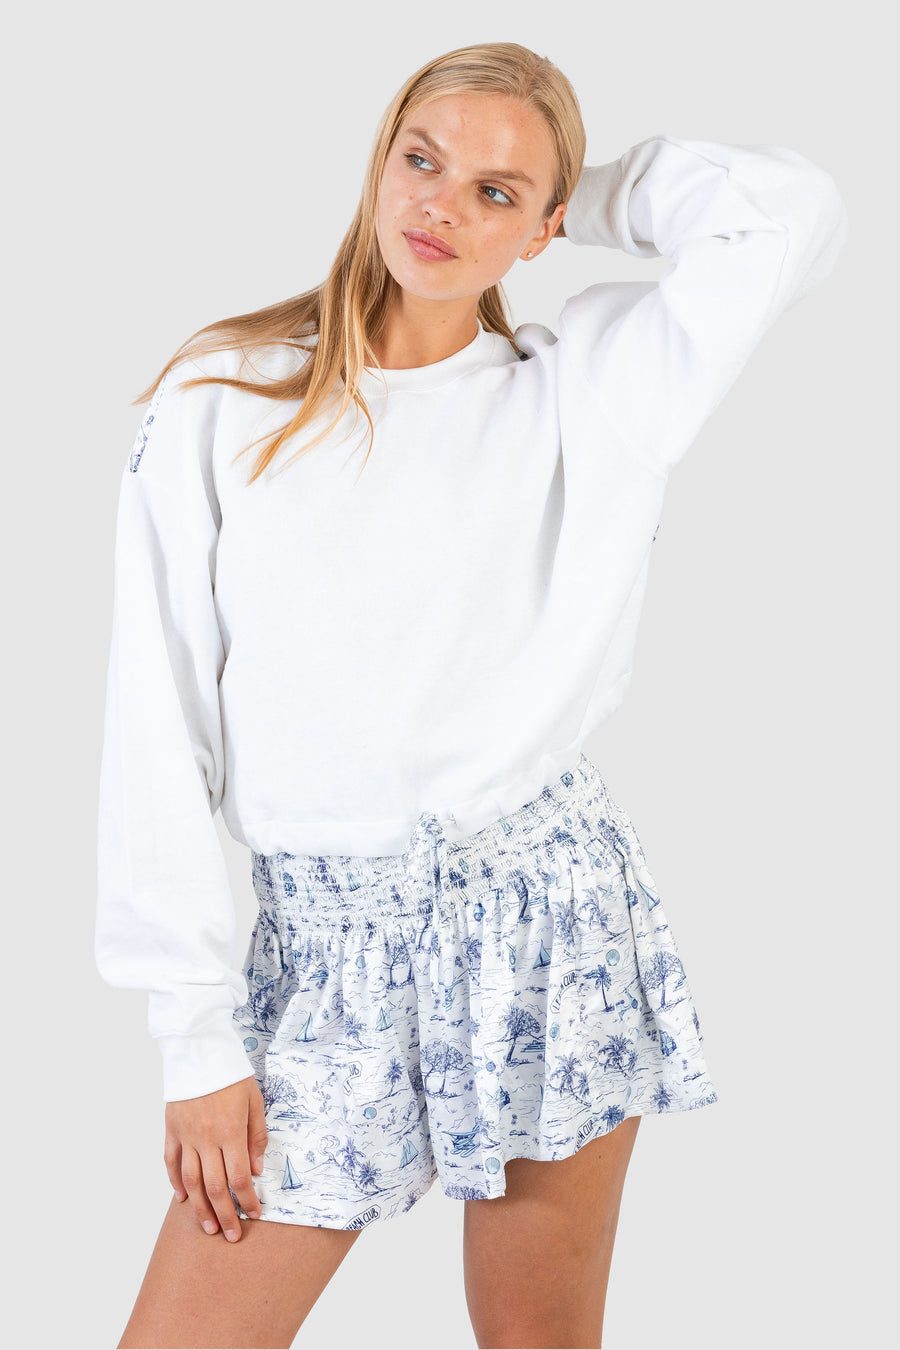 Chase Crop White w/ Blue Toile